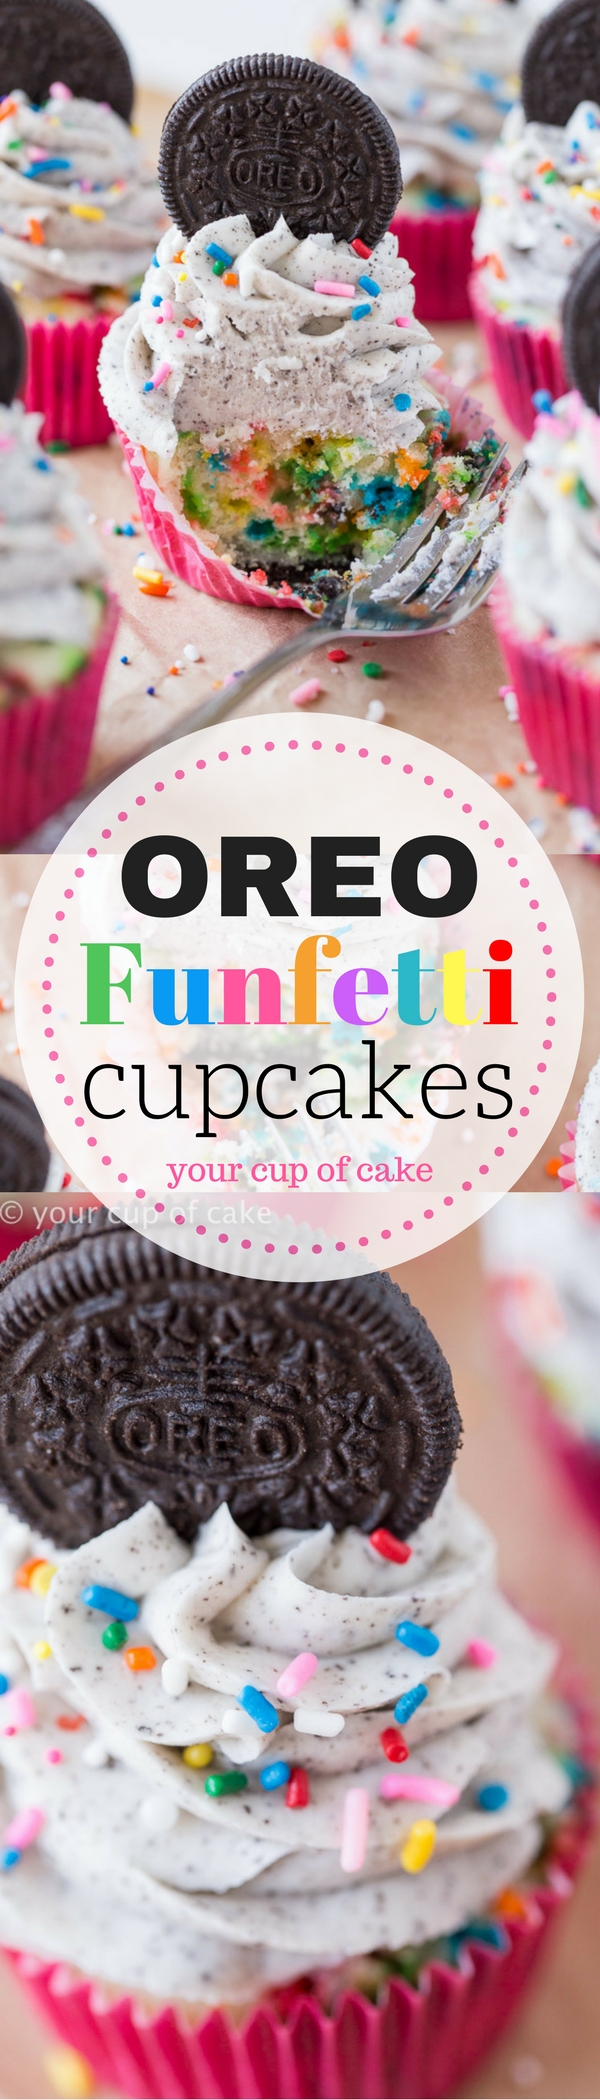 Oreo Funfetti Cupcakes - Your Cup of Cake